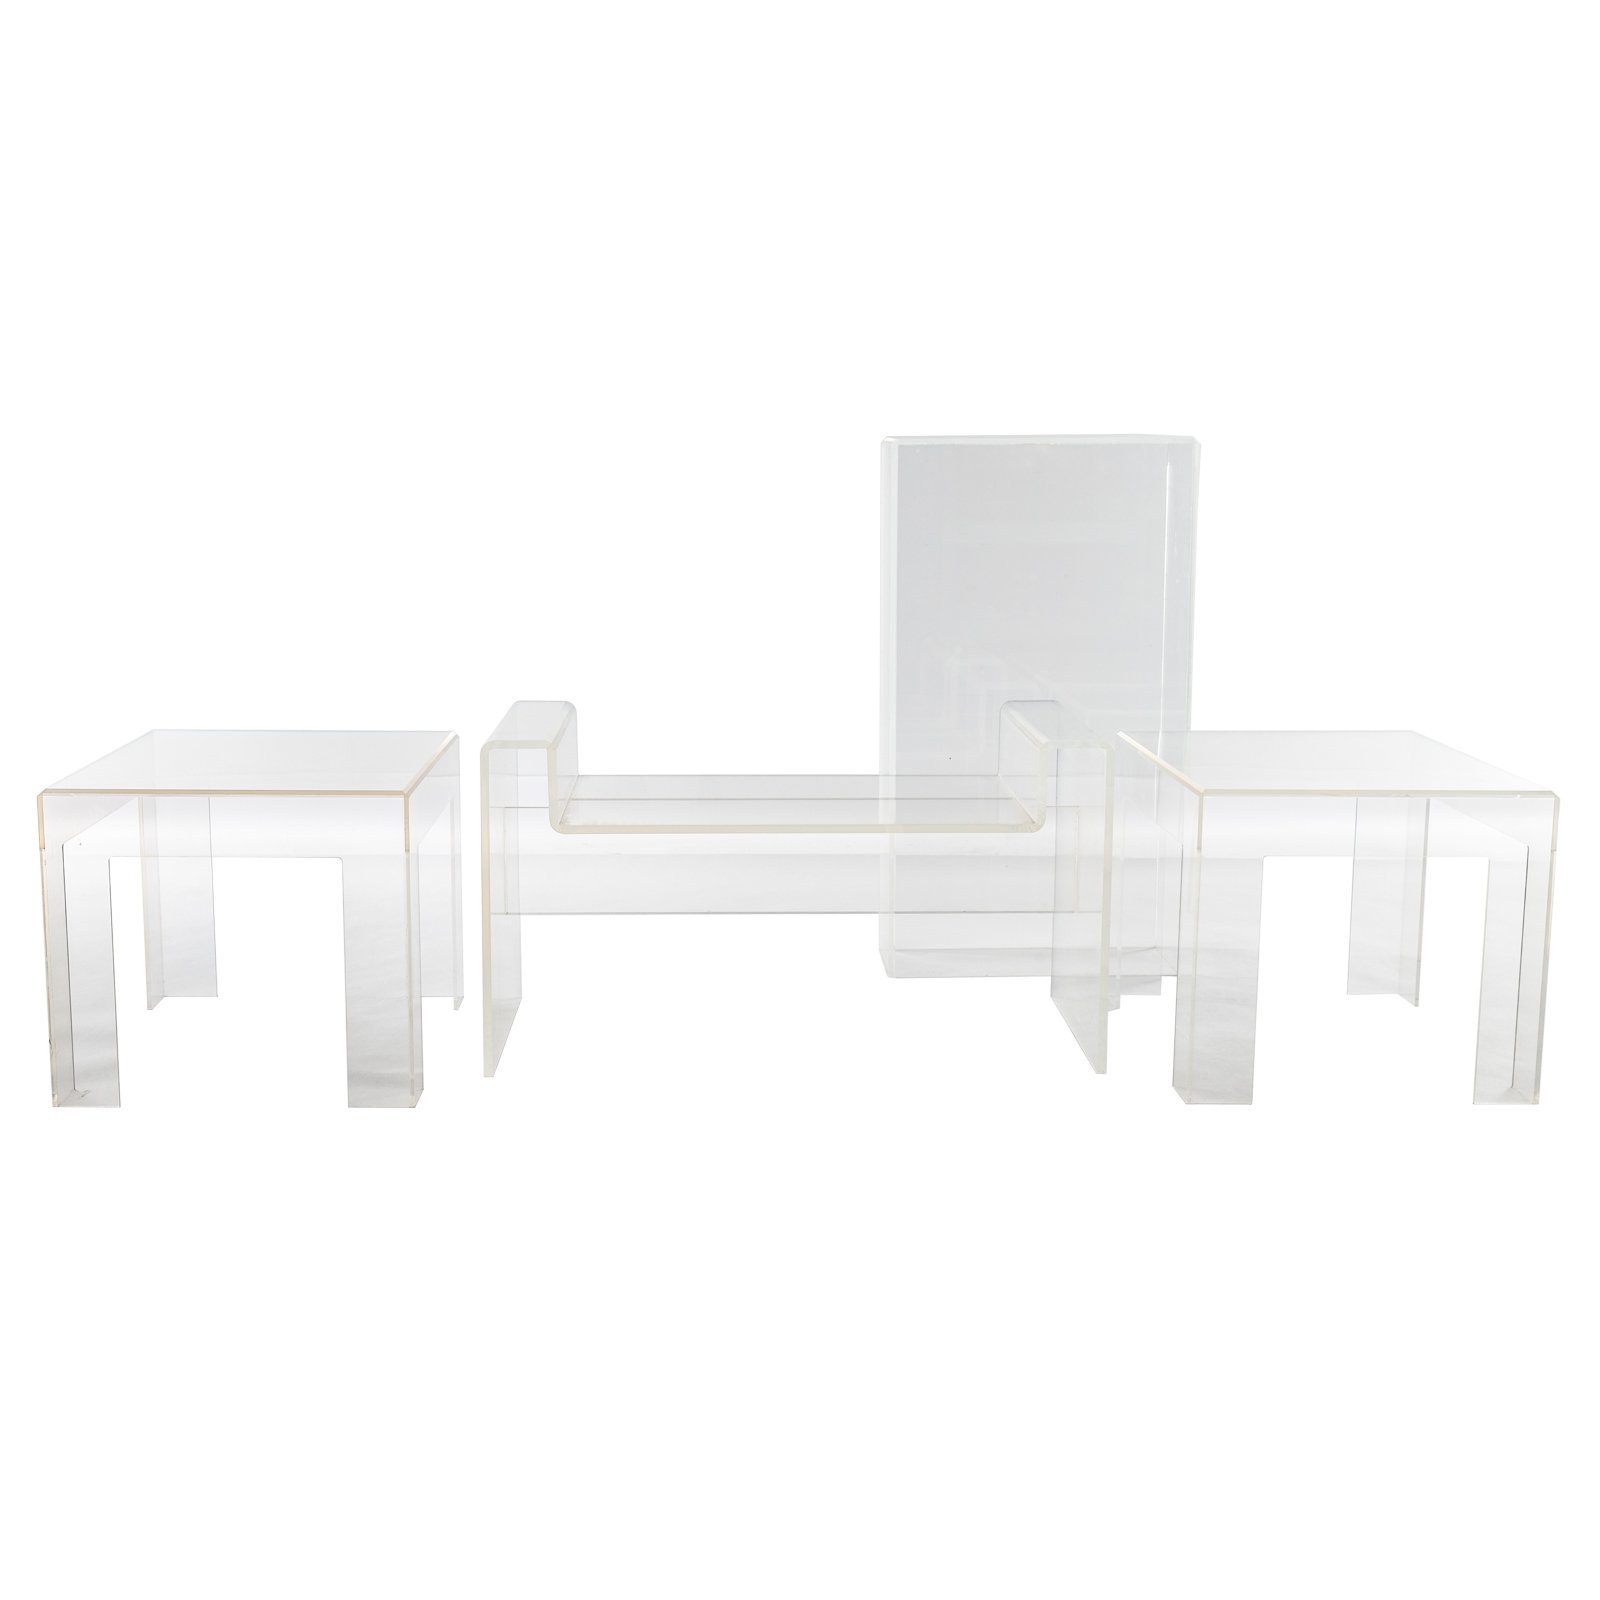 FOUR PIECES OF CLEAR LUCITE FURNITURE 369408